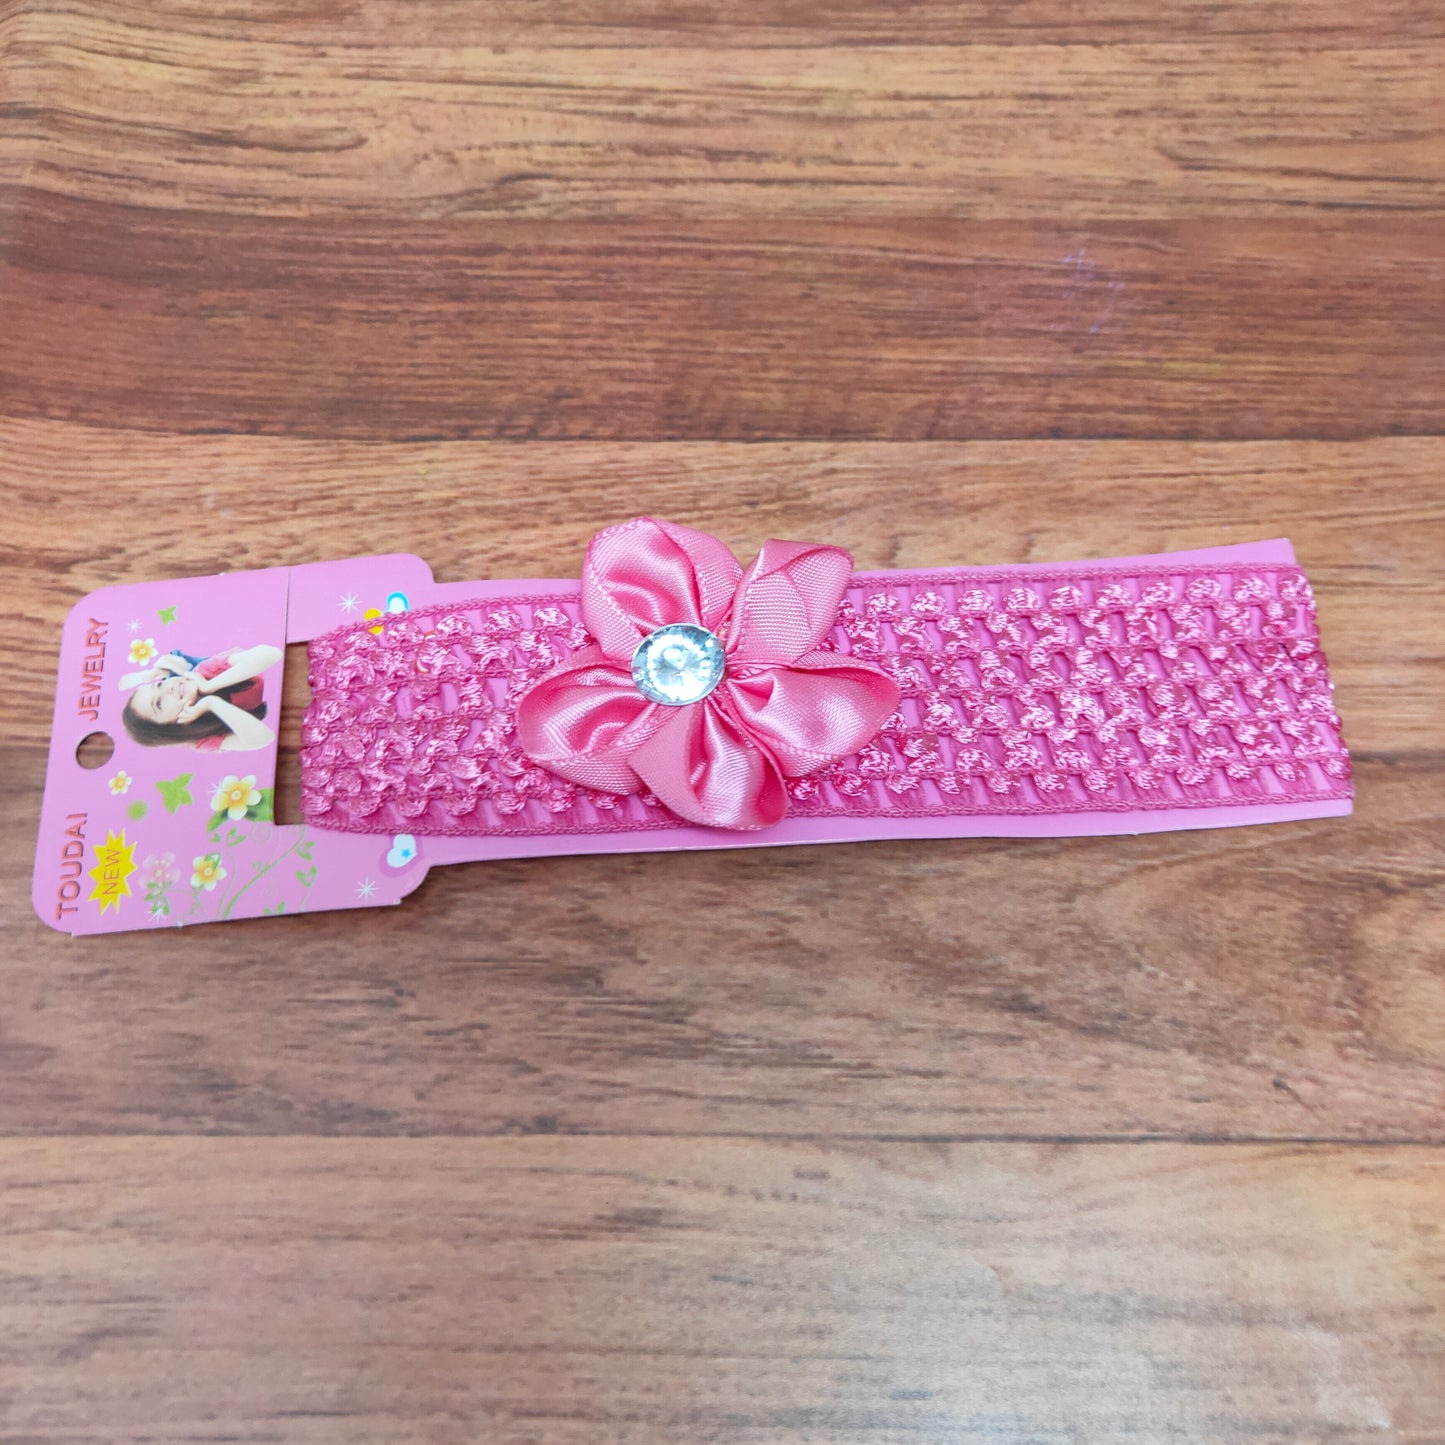 Floral Soft Stretchy Headbands for Baby Girls and Newborn (17-33 Baby Headband)